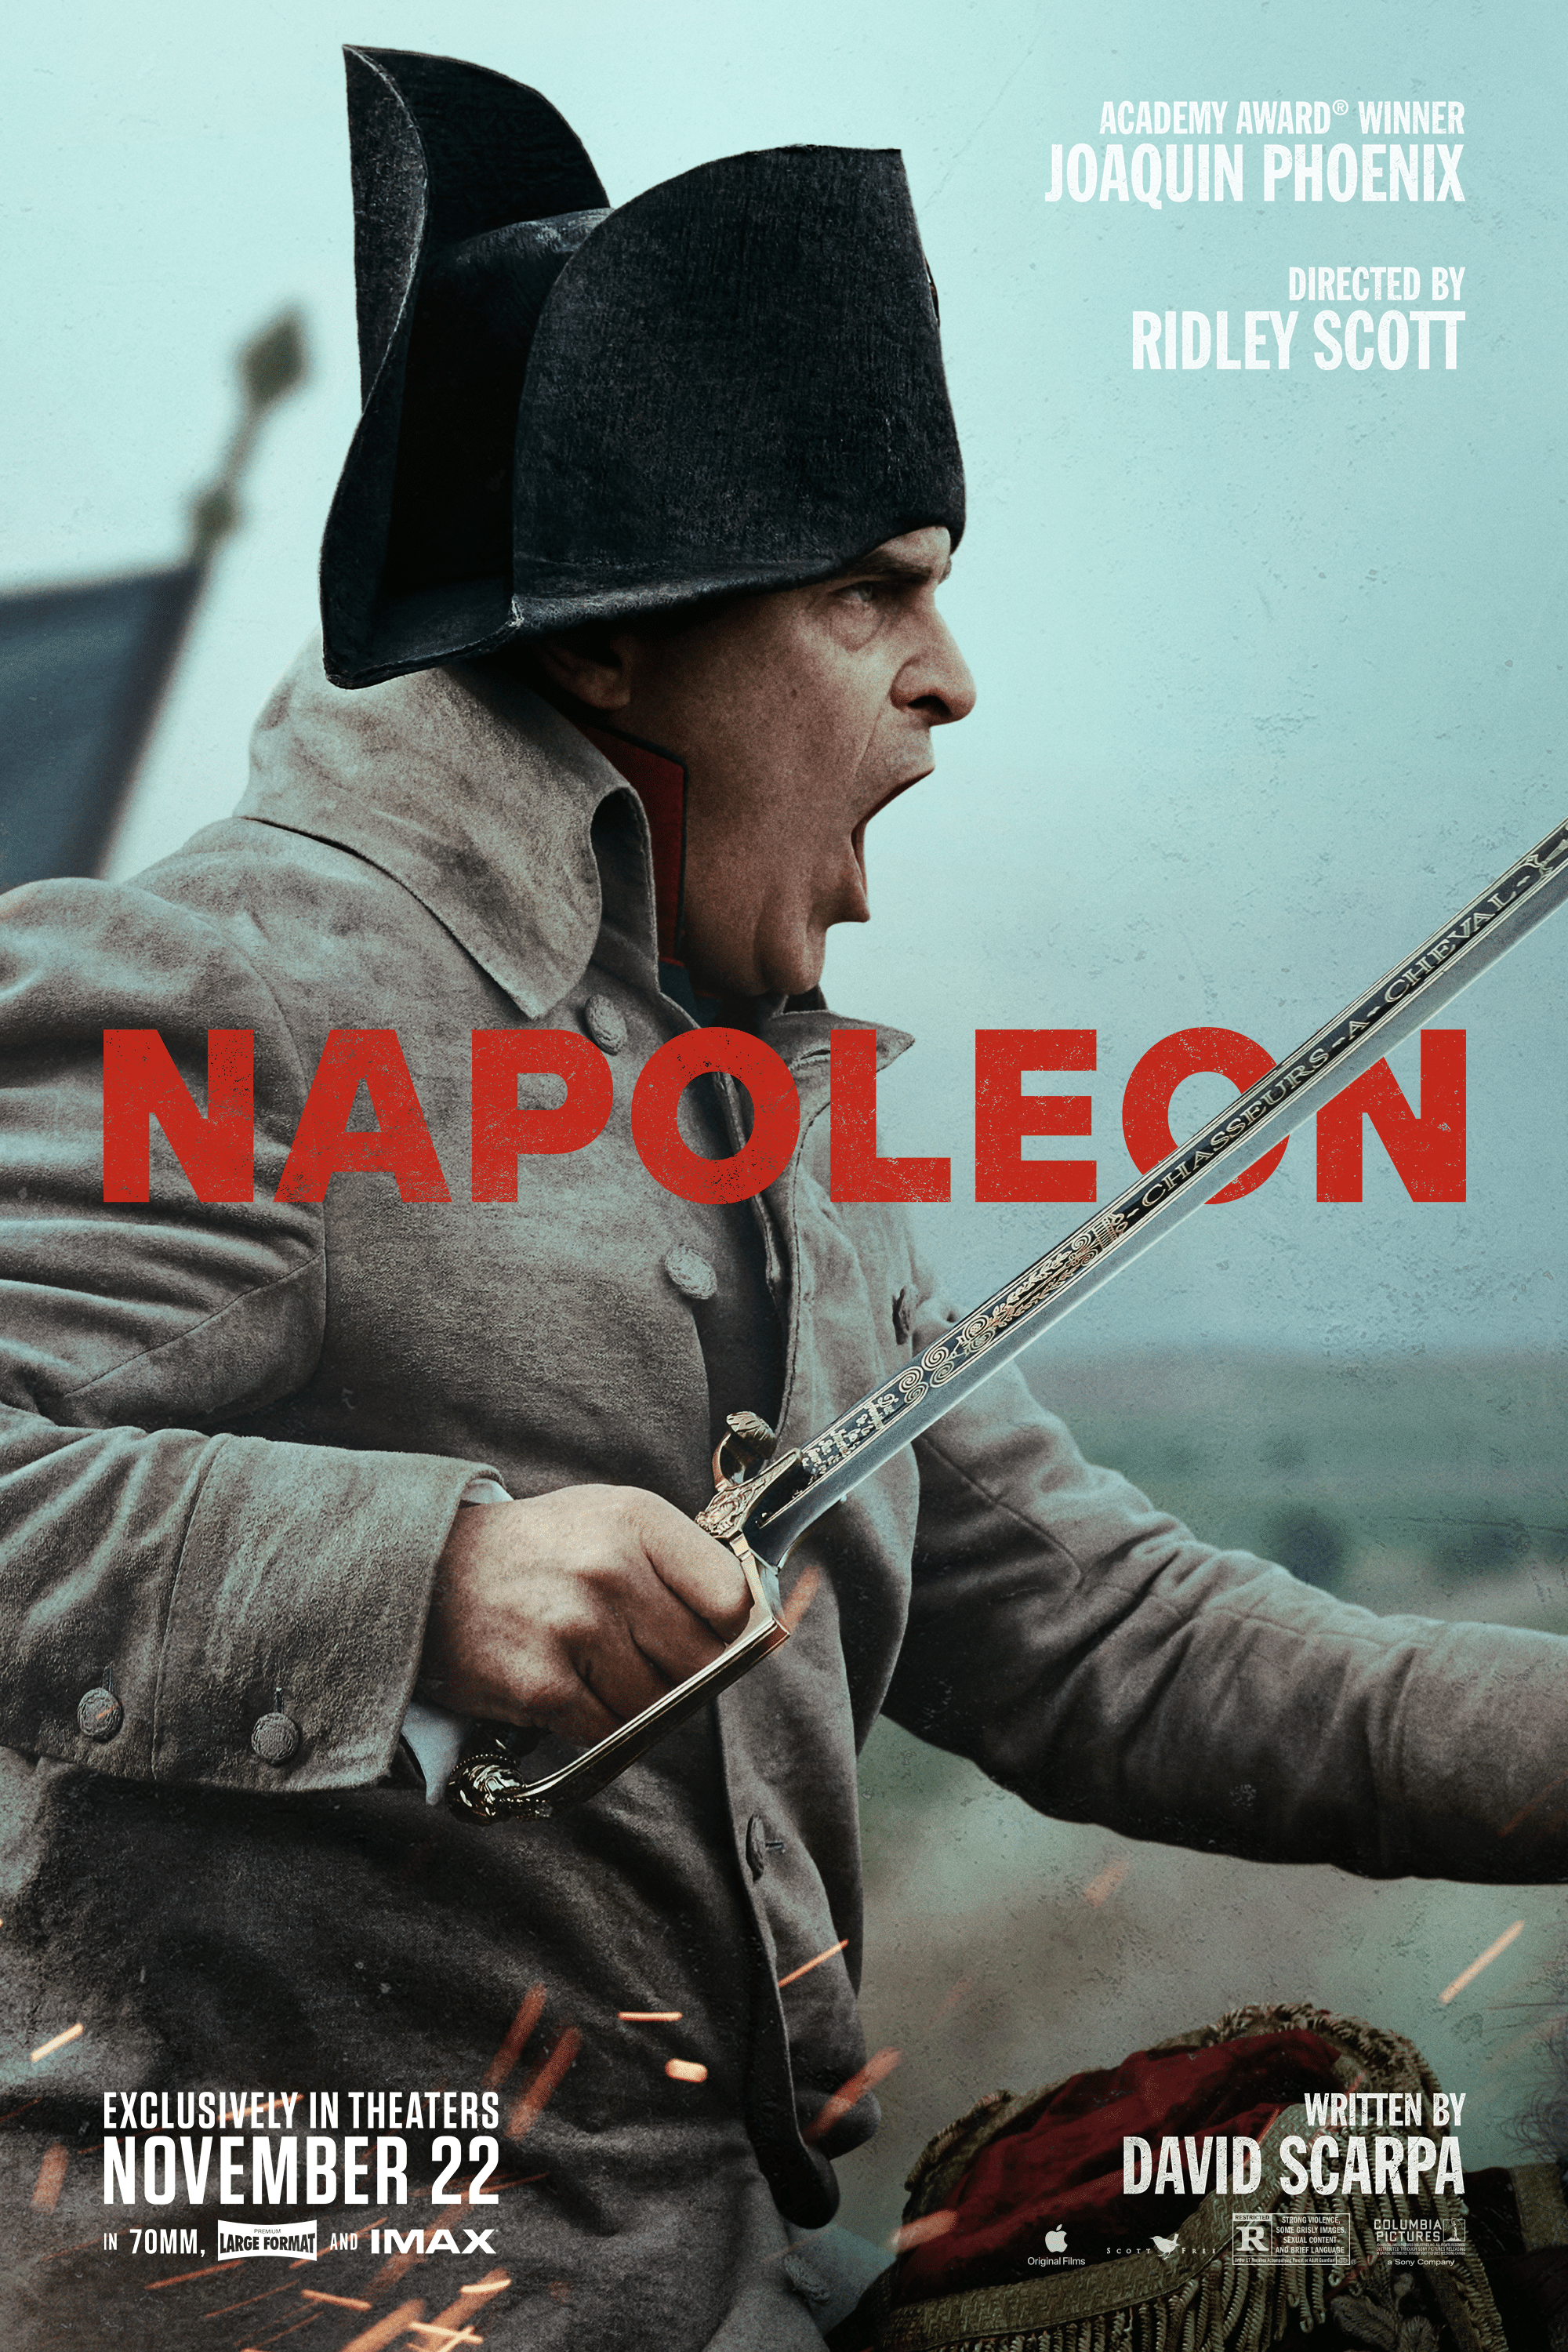 Napoleon review: Ridley Scott delivers a visual spectacle with a complex  portrait of the fabled emperor that is more about Empress Joséphine than  the military conquests